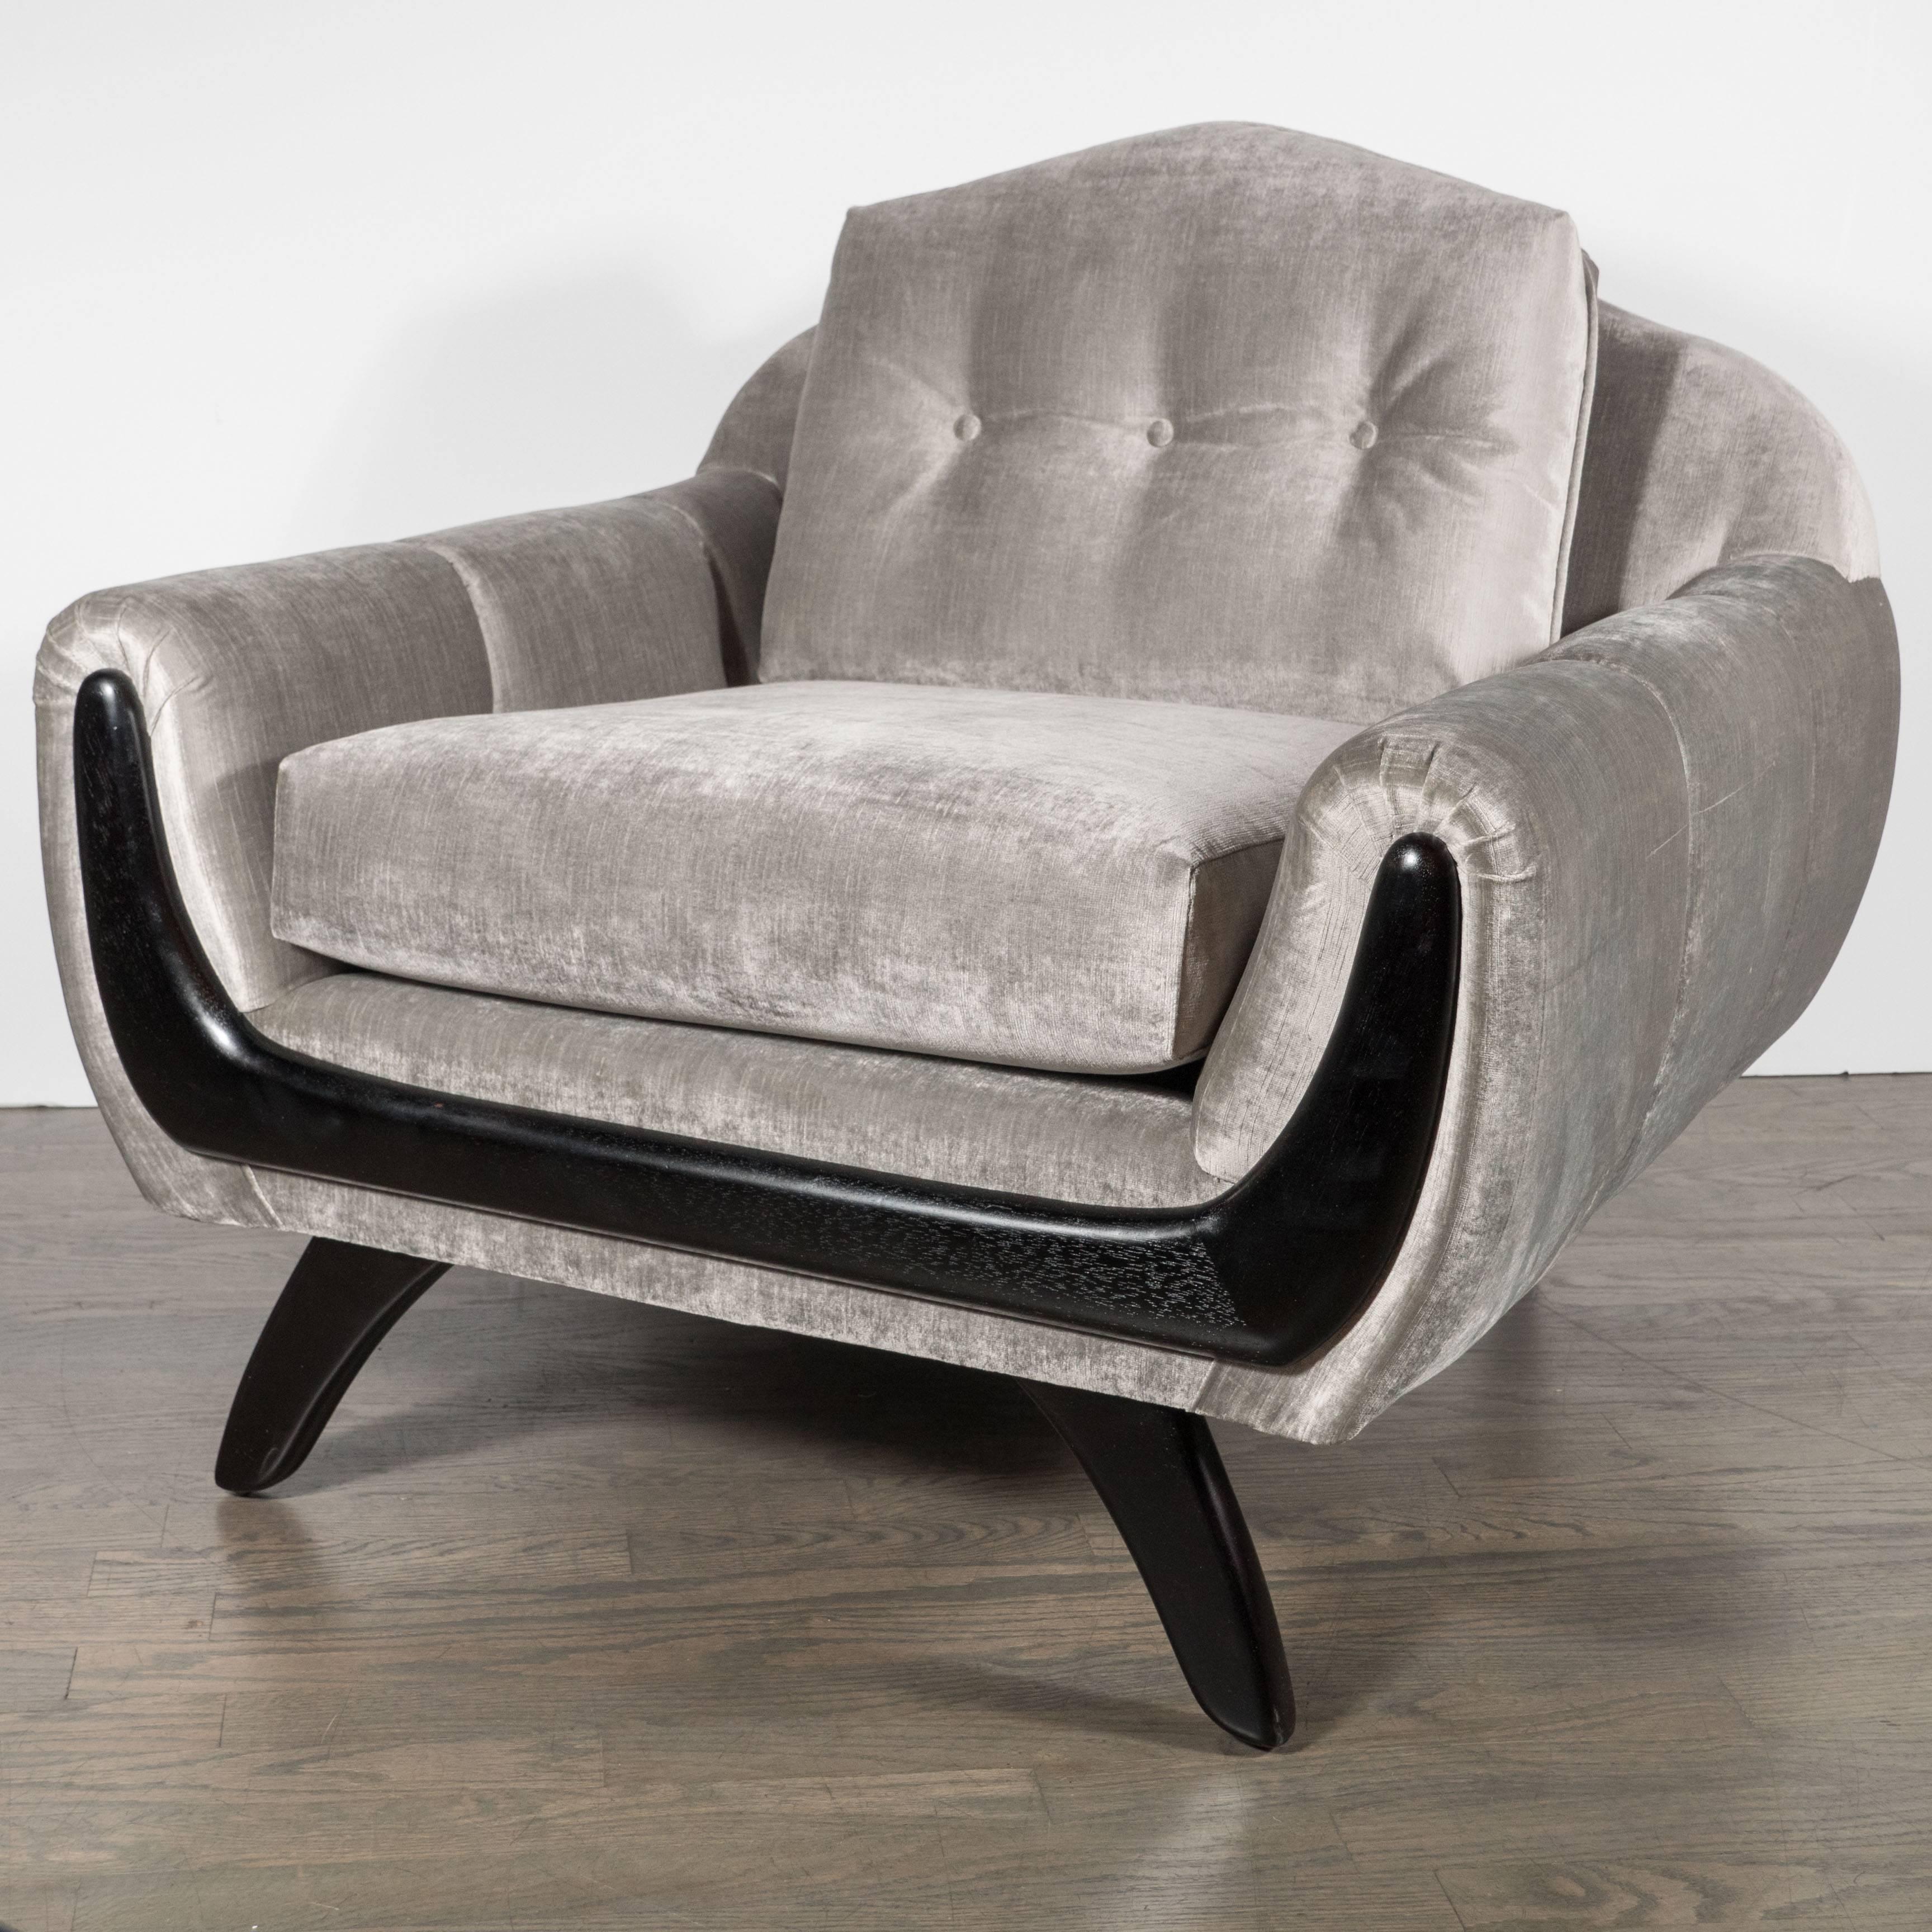 A pair of Mid-Century Modernist armchairs, low profile design with a hand rubbed walnut trim and splayed legs. These chairs are perfect for lounging and are extremely comfortable. They have been newly upholstered in a smoked platinum velvet and